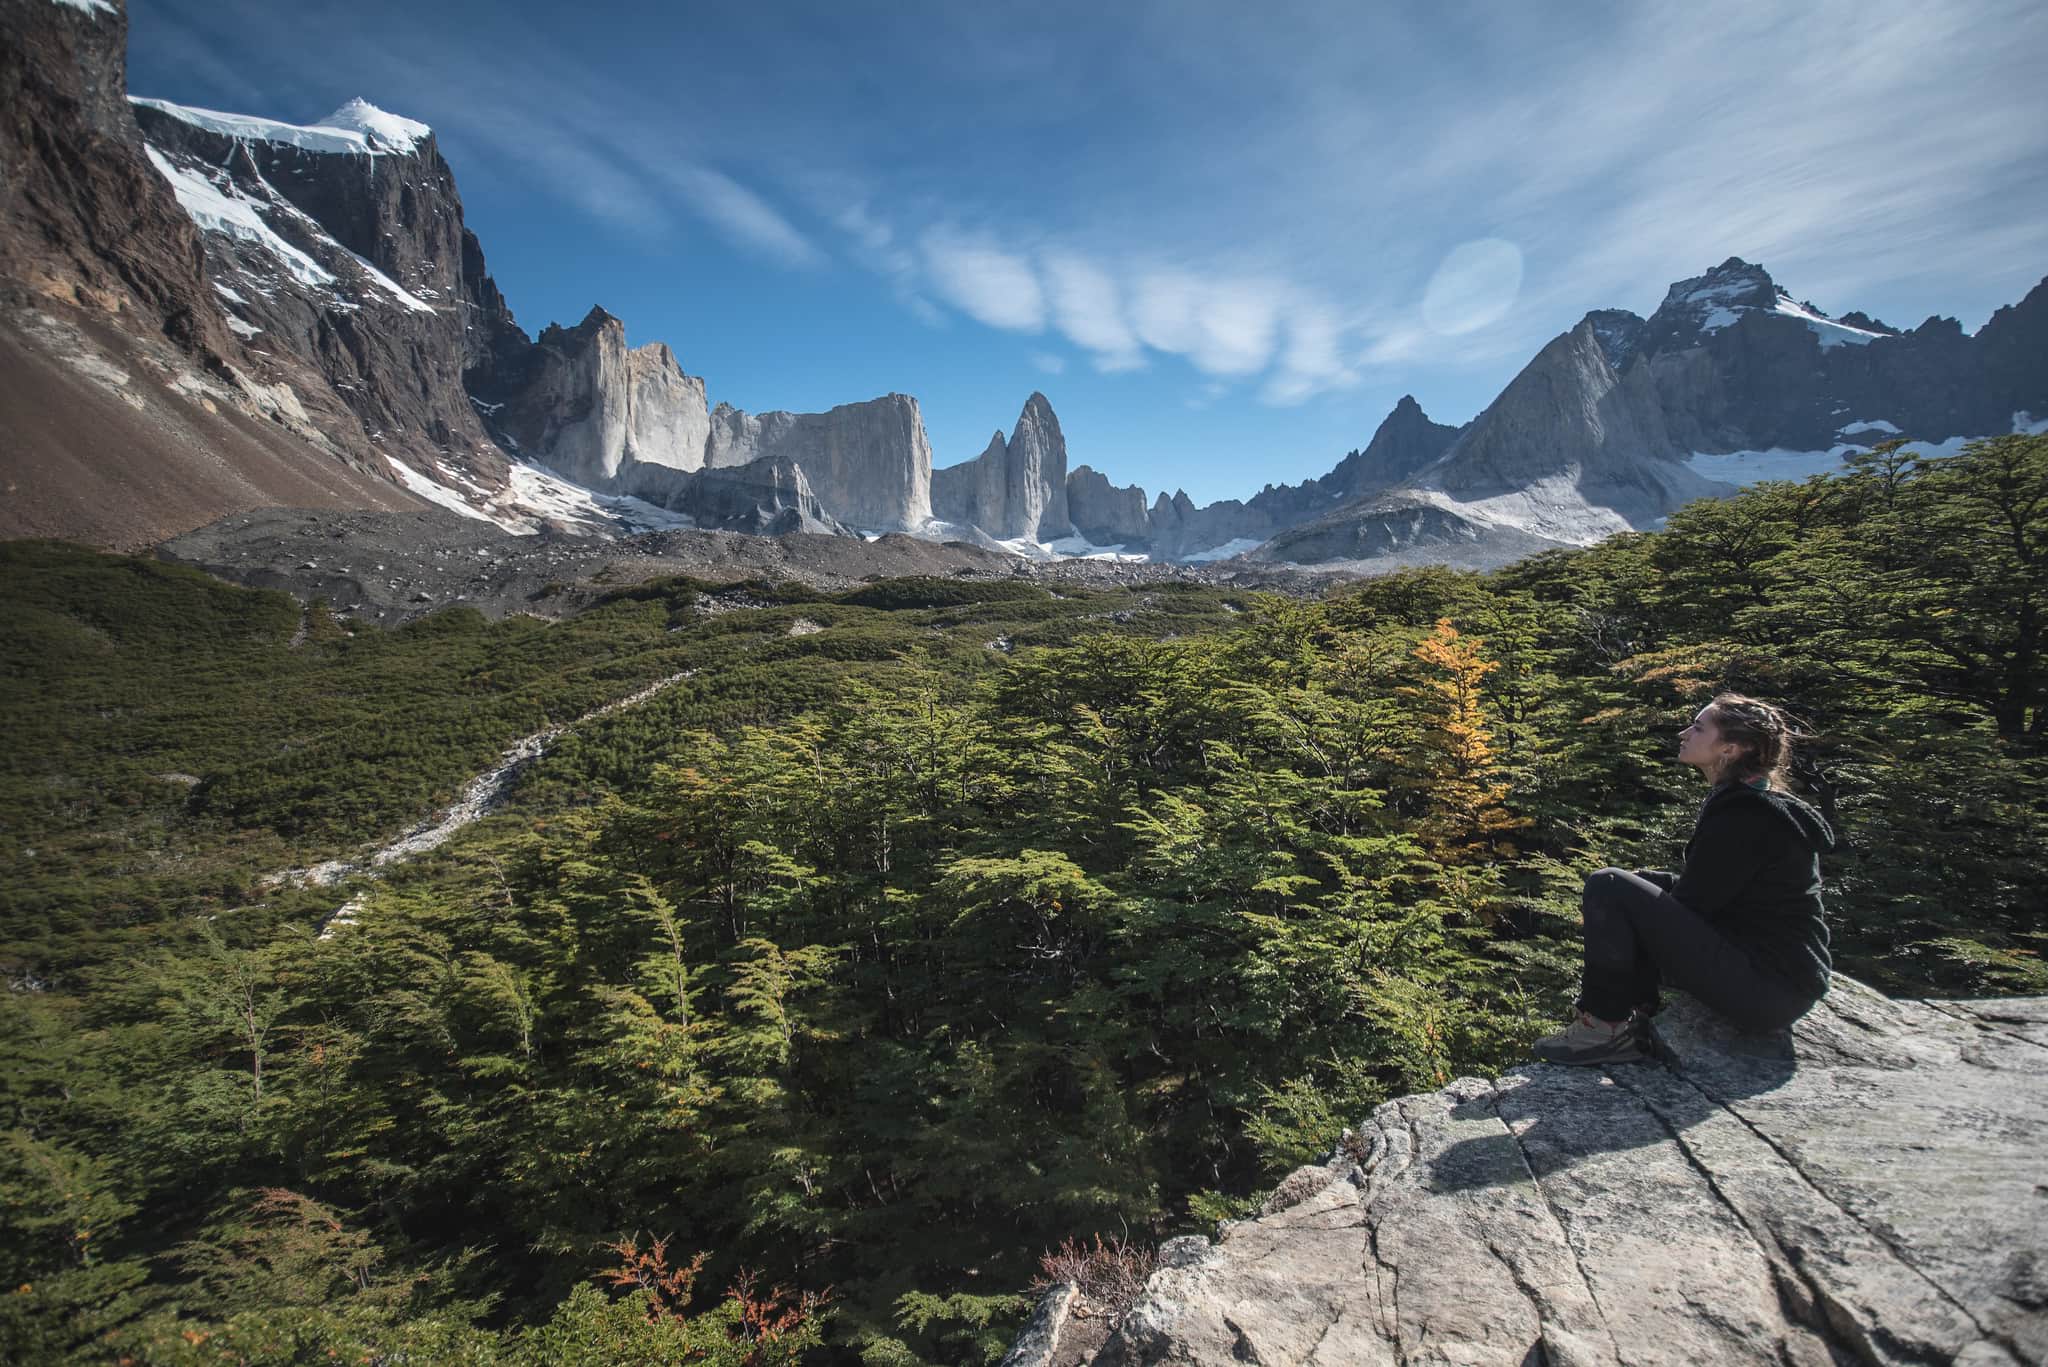 The British Viewpoint in Torres del Paine National Park